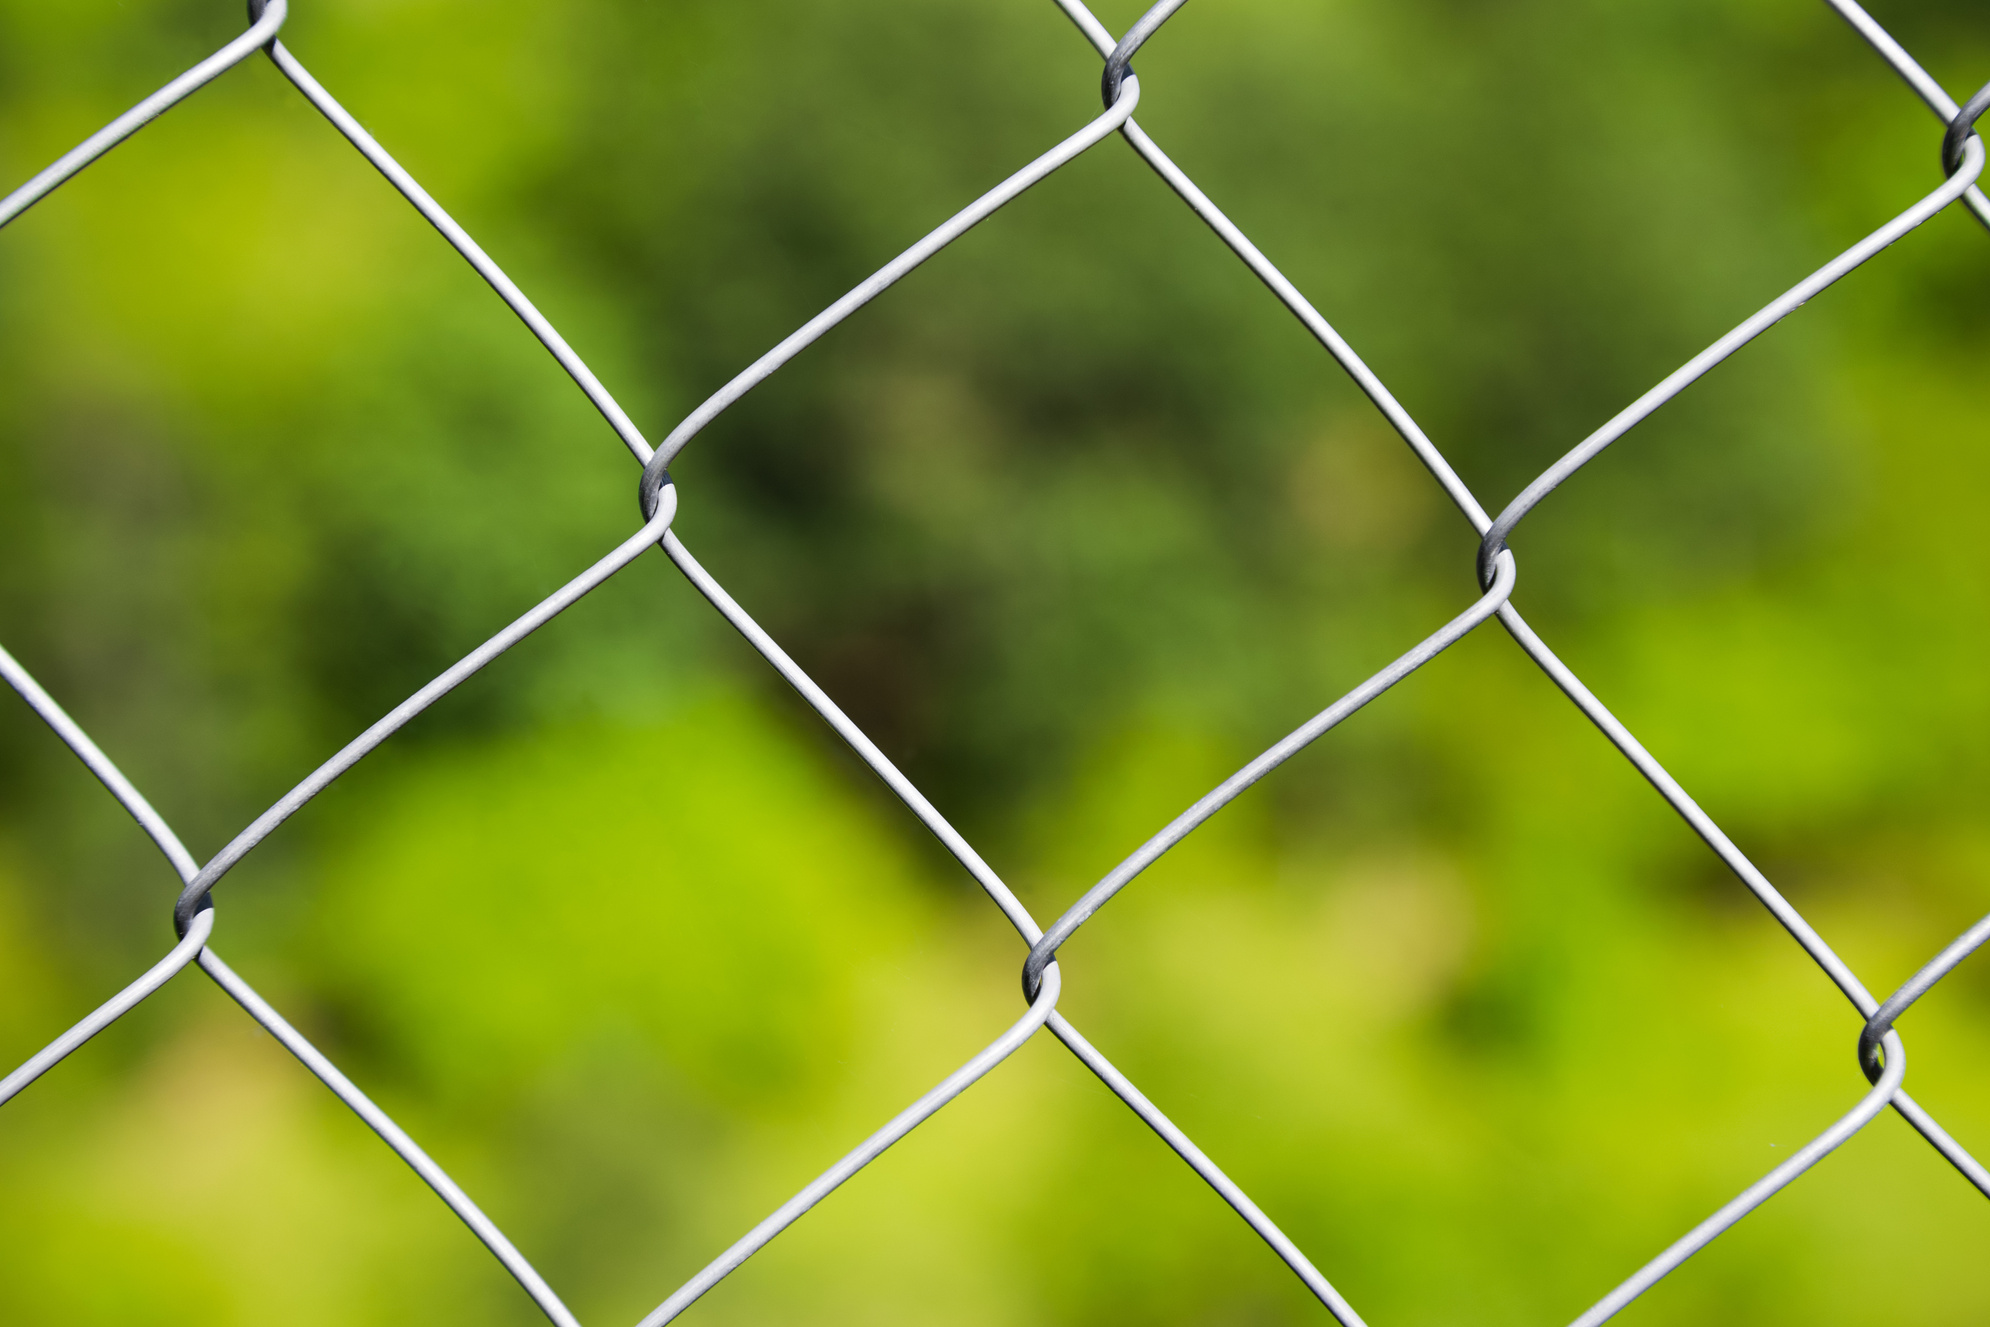 Detail of a diamond mesh wire fence